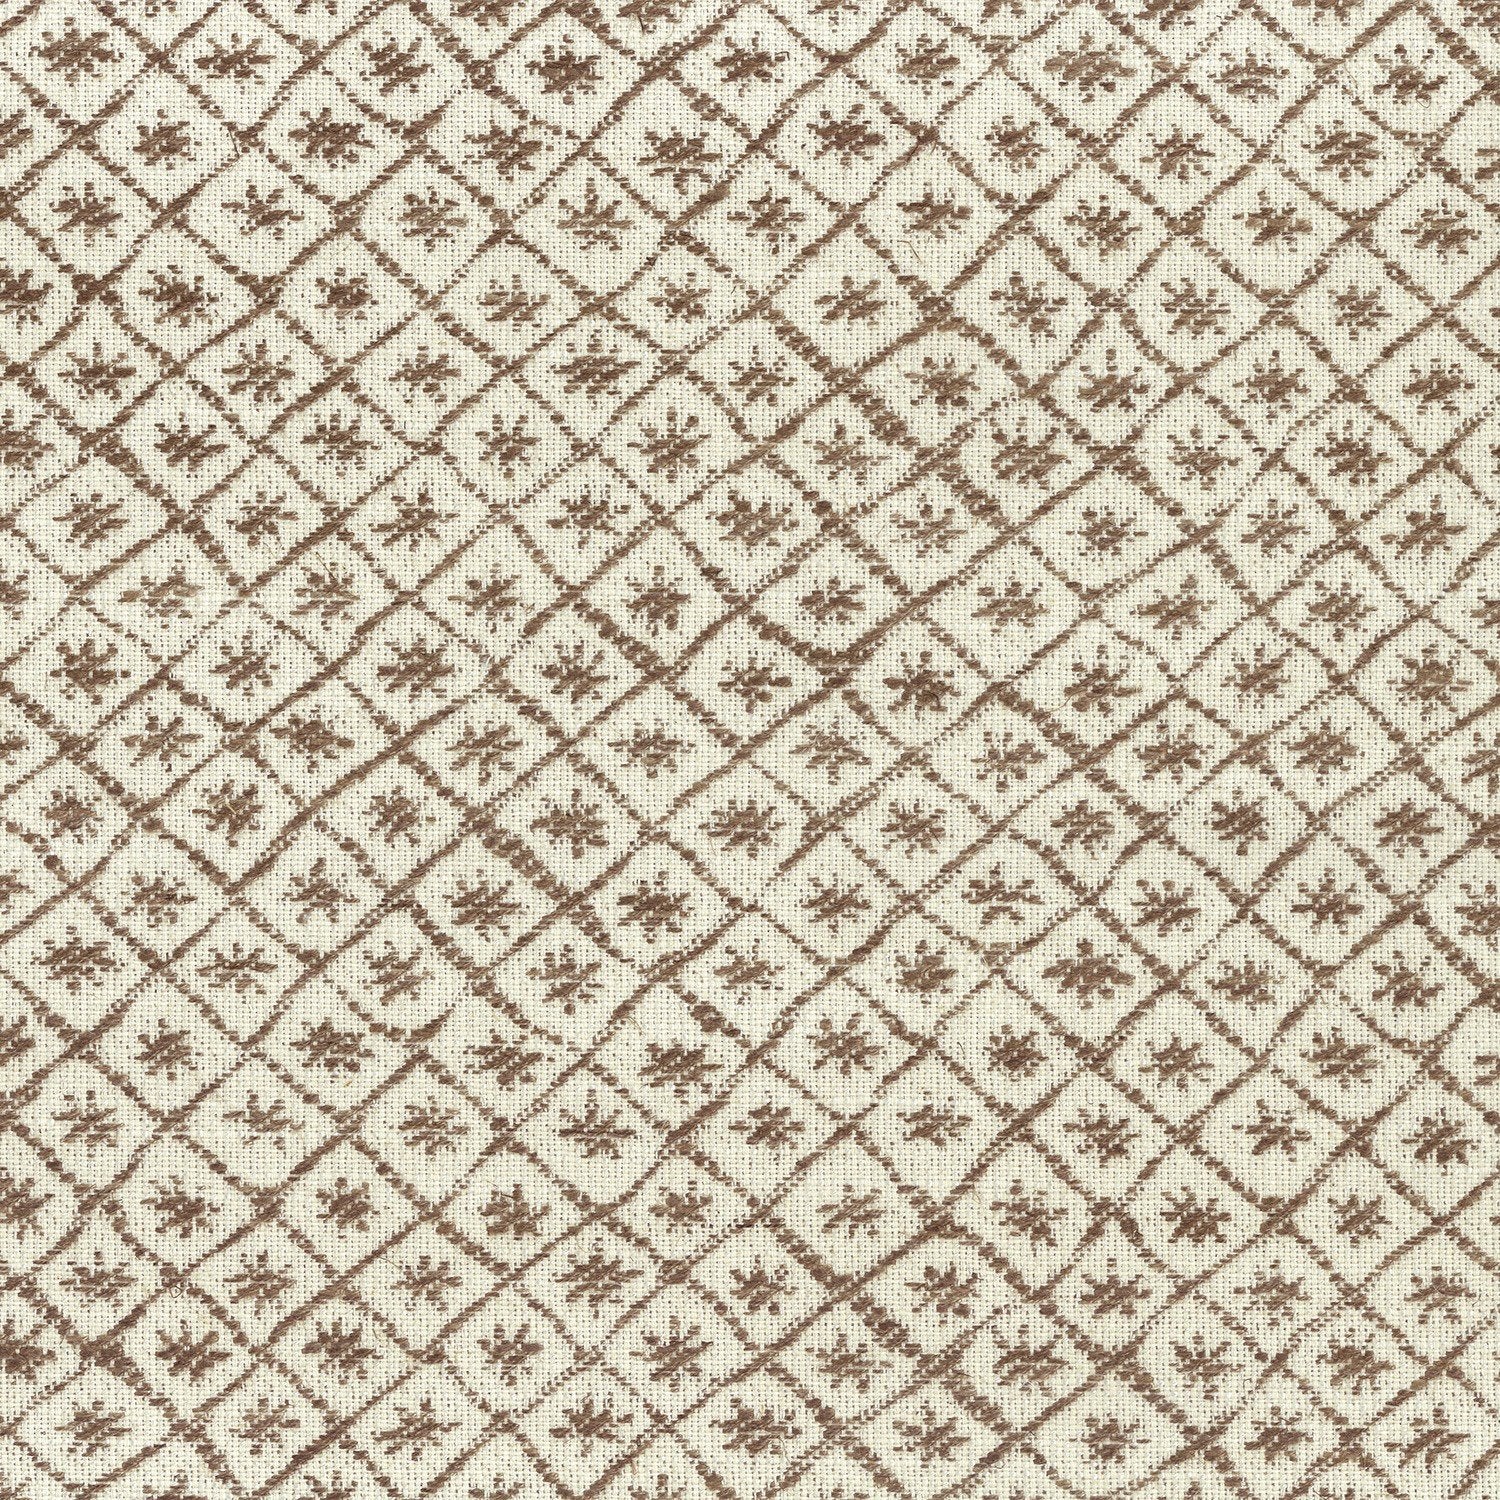 Nina Campbell Fabric - Jacquet Solitaire Taupe/Ivory NCF4220-01